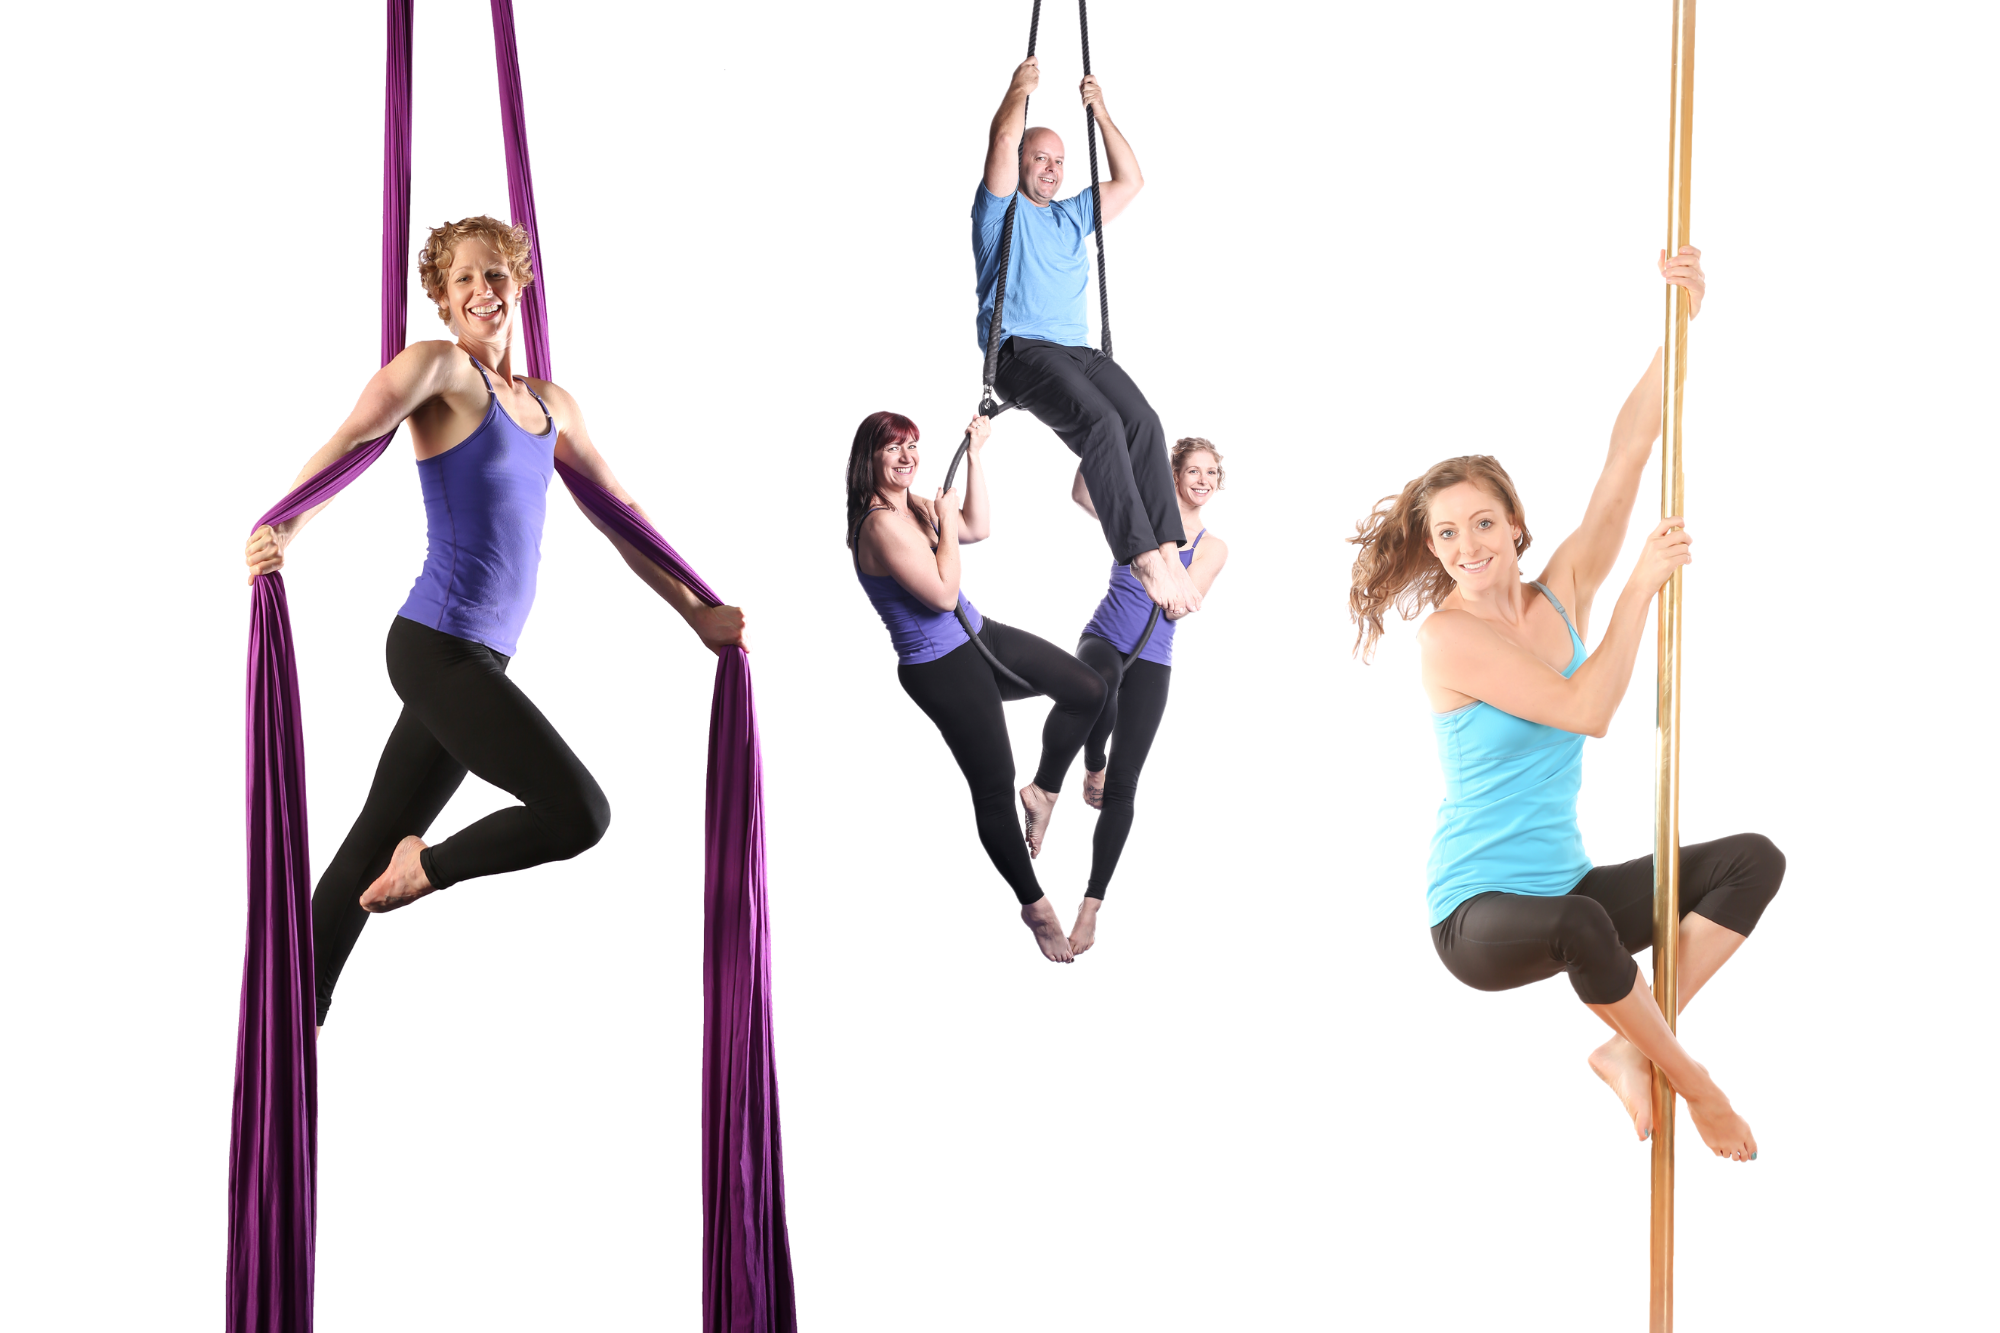 https://images.squarespace-cdn.com/content/v1/5b8060b99772aecb6dc25d02/1542300114791-1YCYJW76CR3ZHUNBE4WH/Pole+and+Aerial+Curriculum+Classes+for+Adults+%28home+page%29+%281%29.png